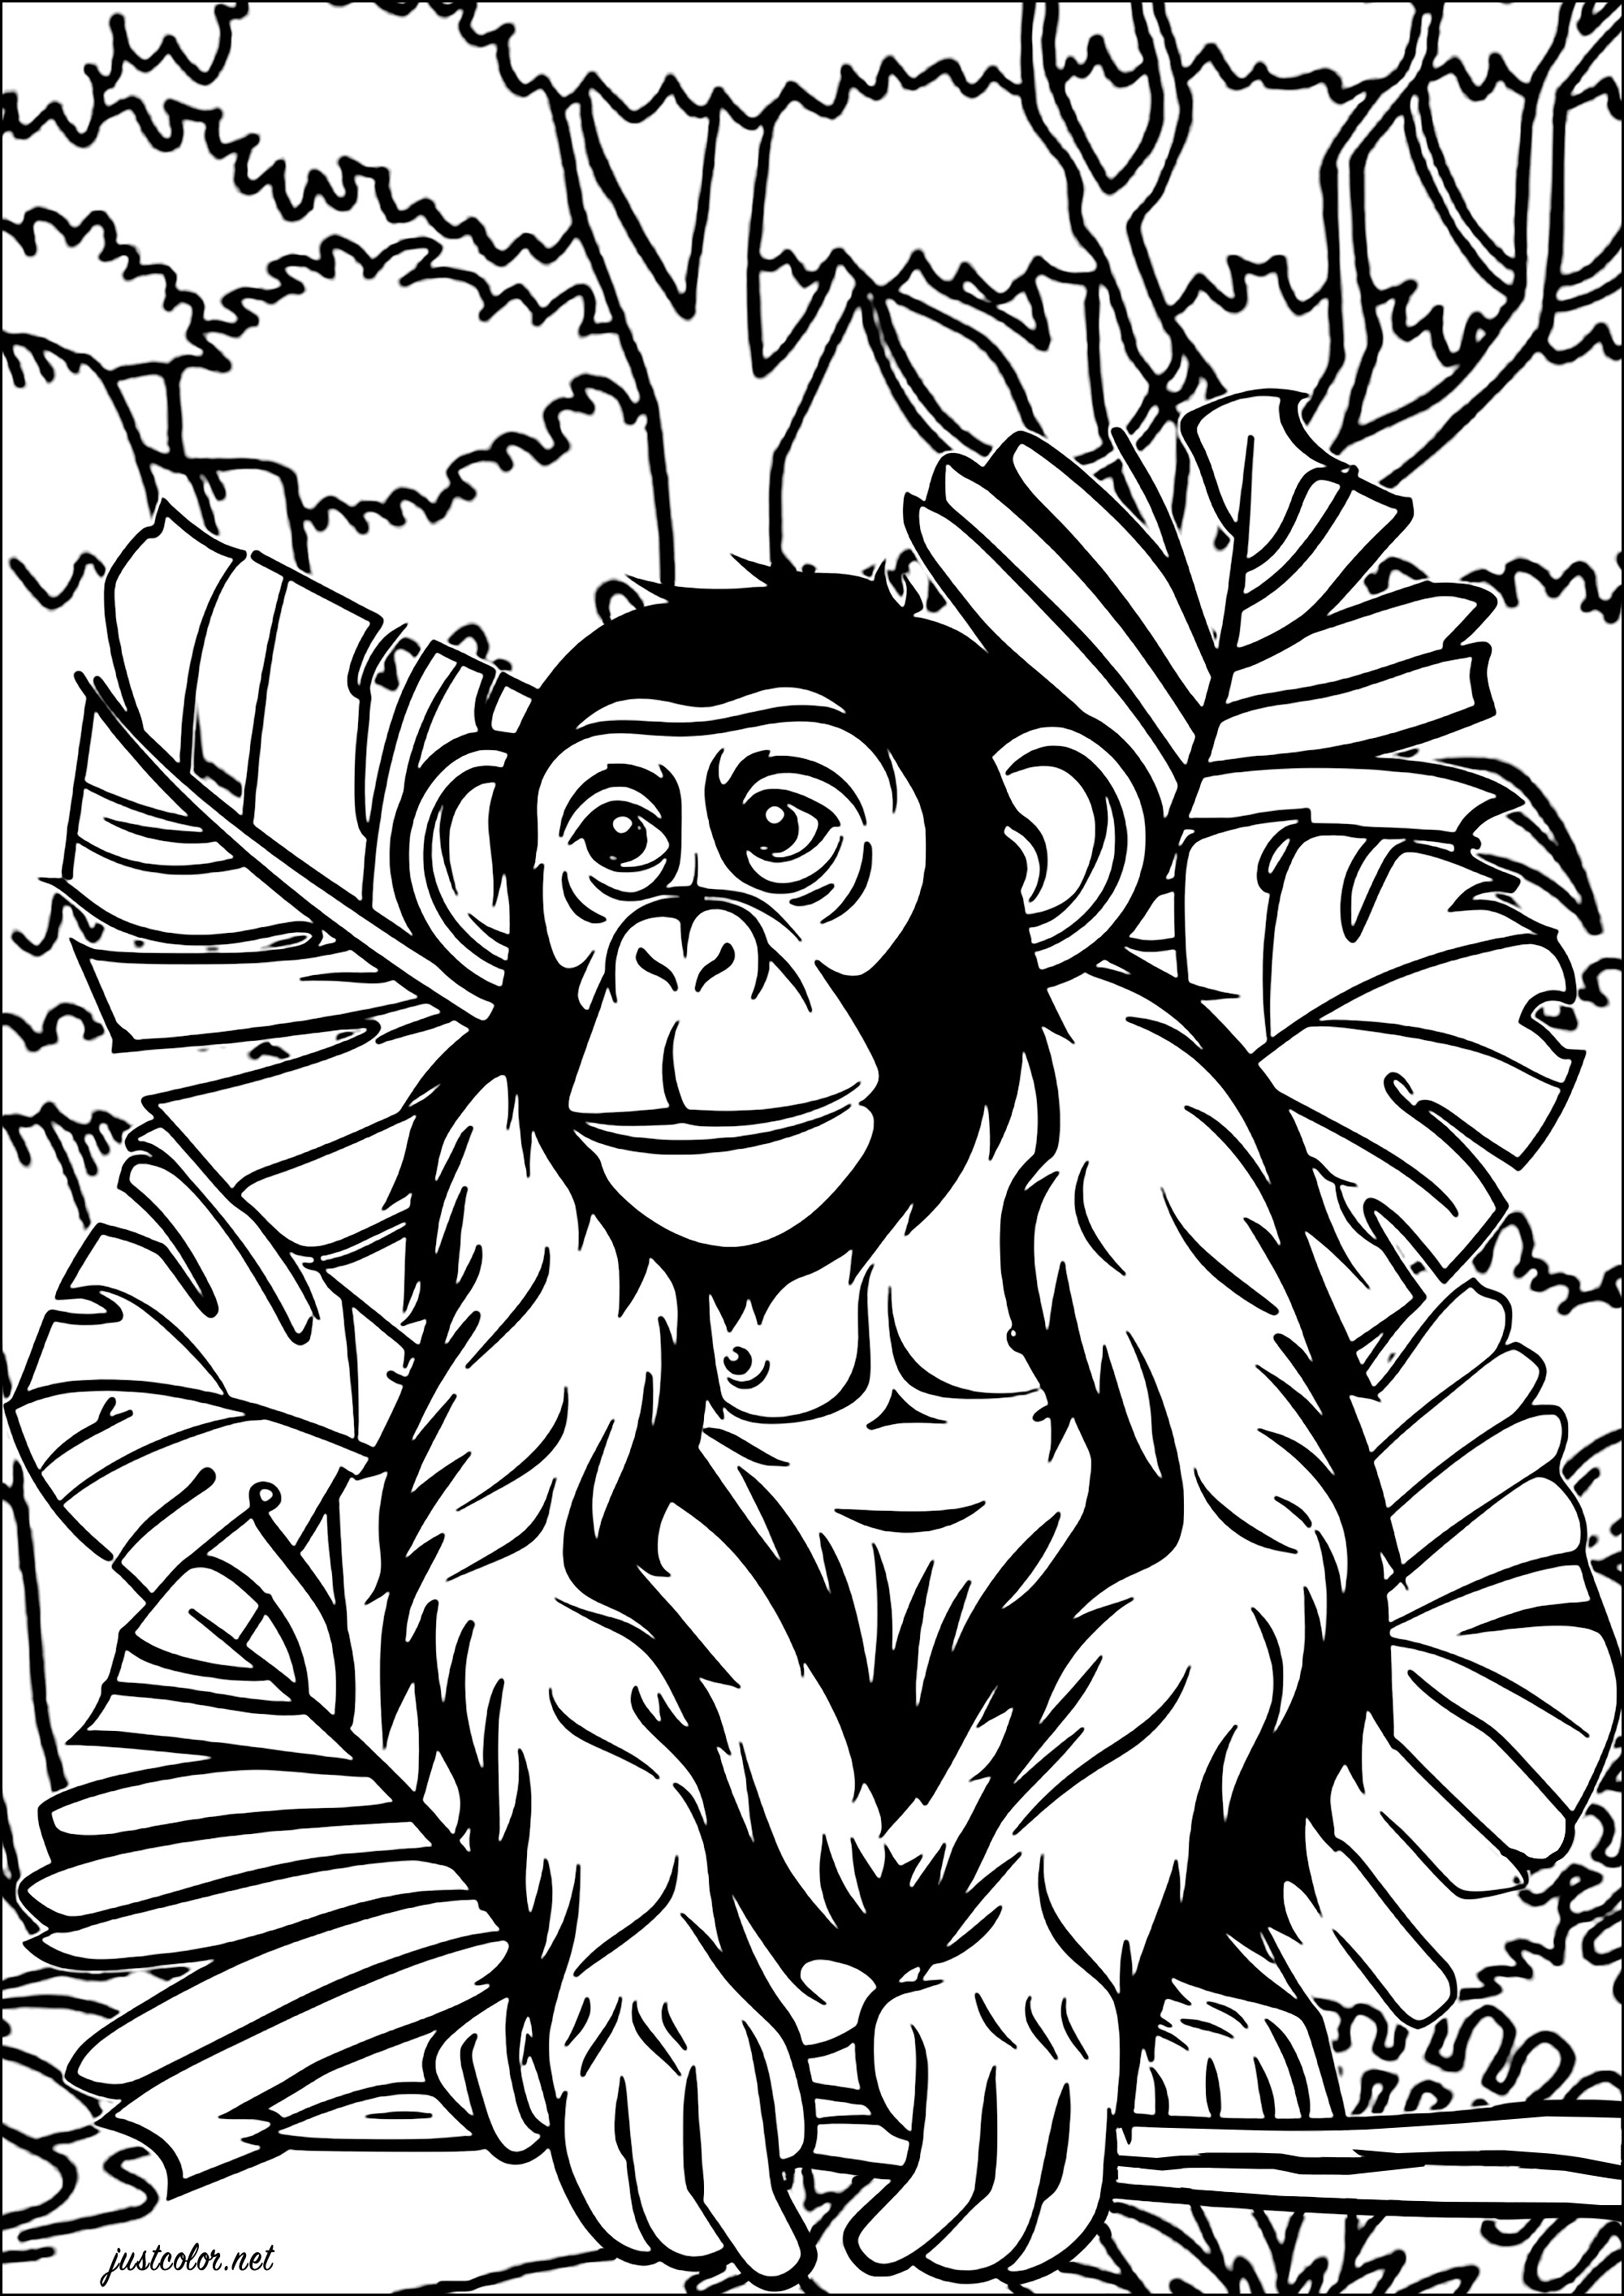 Chimpanzee in the jungle. A very realistic drawing of a chimpanzee to color, with large leaves and giant trees in the background.